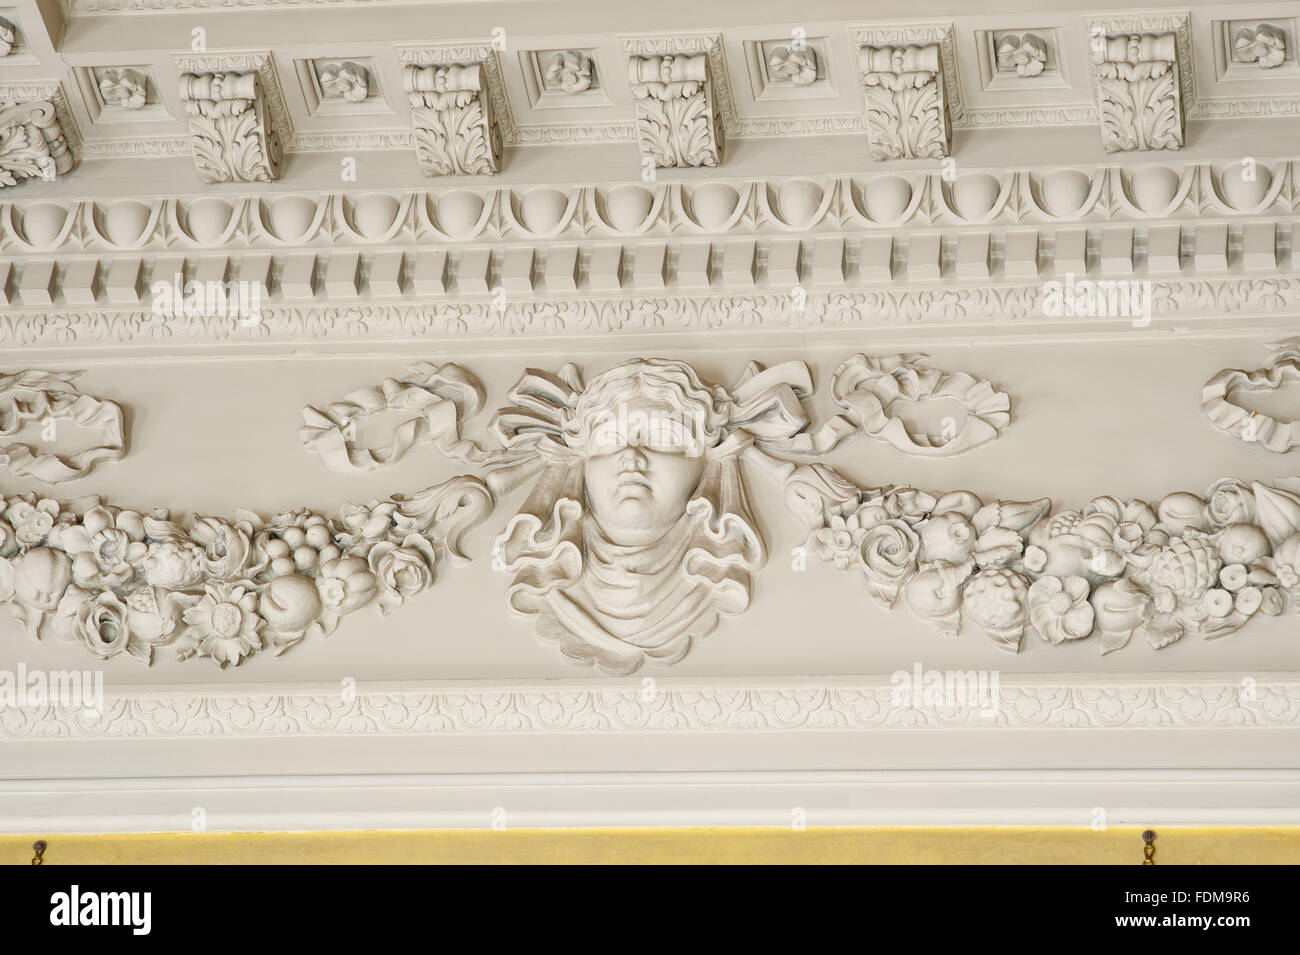 Detail of the plasterwork decoration in the Great Hall at Dunham Massey, Cheshire. Stock Photo